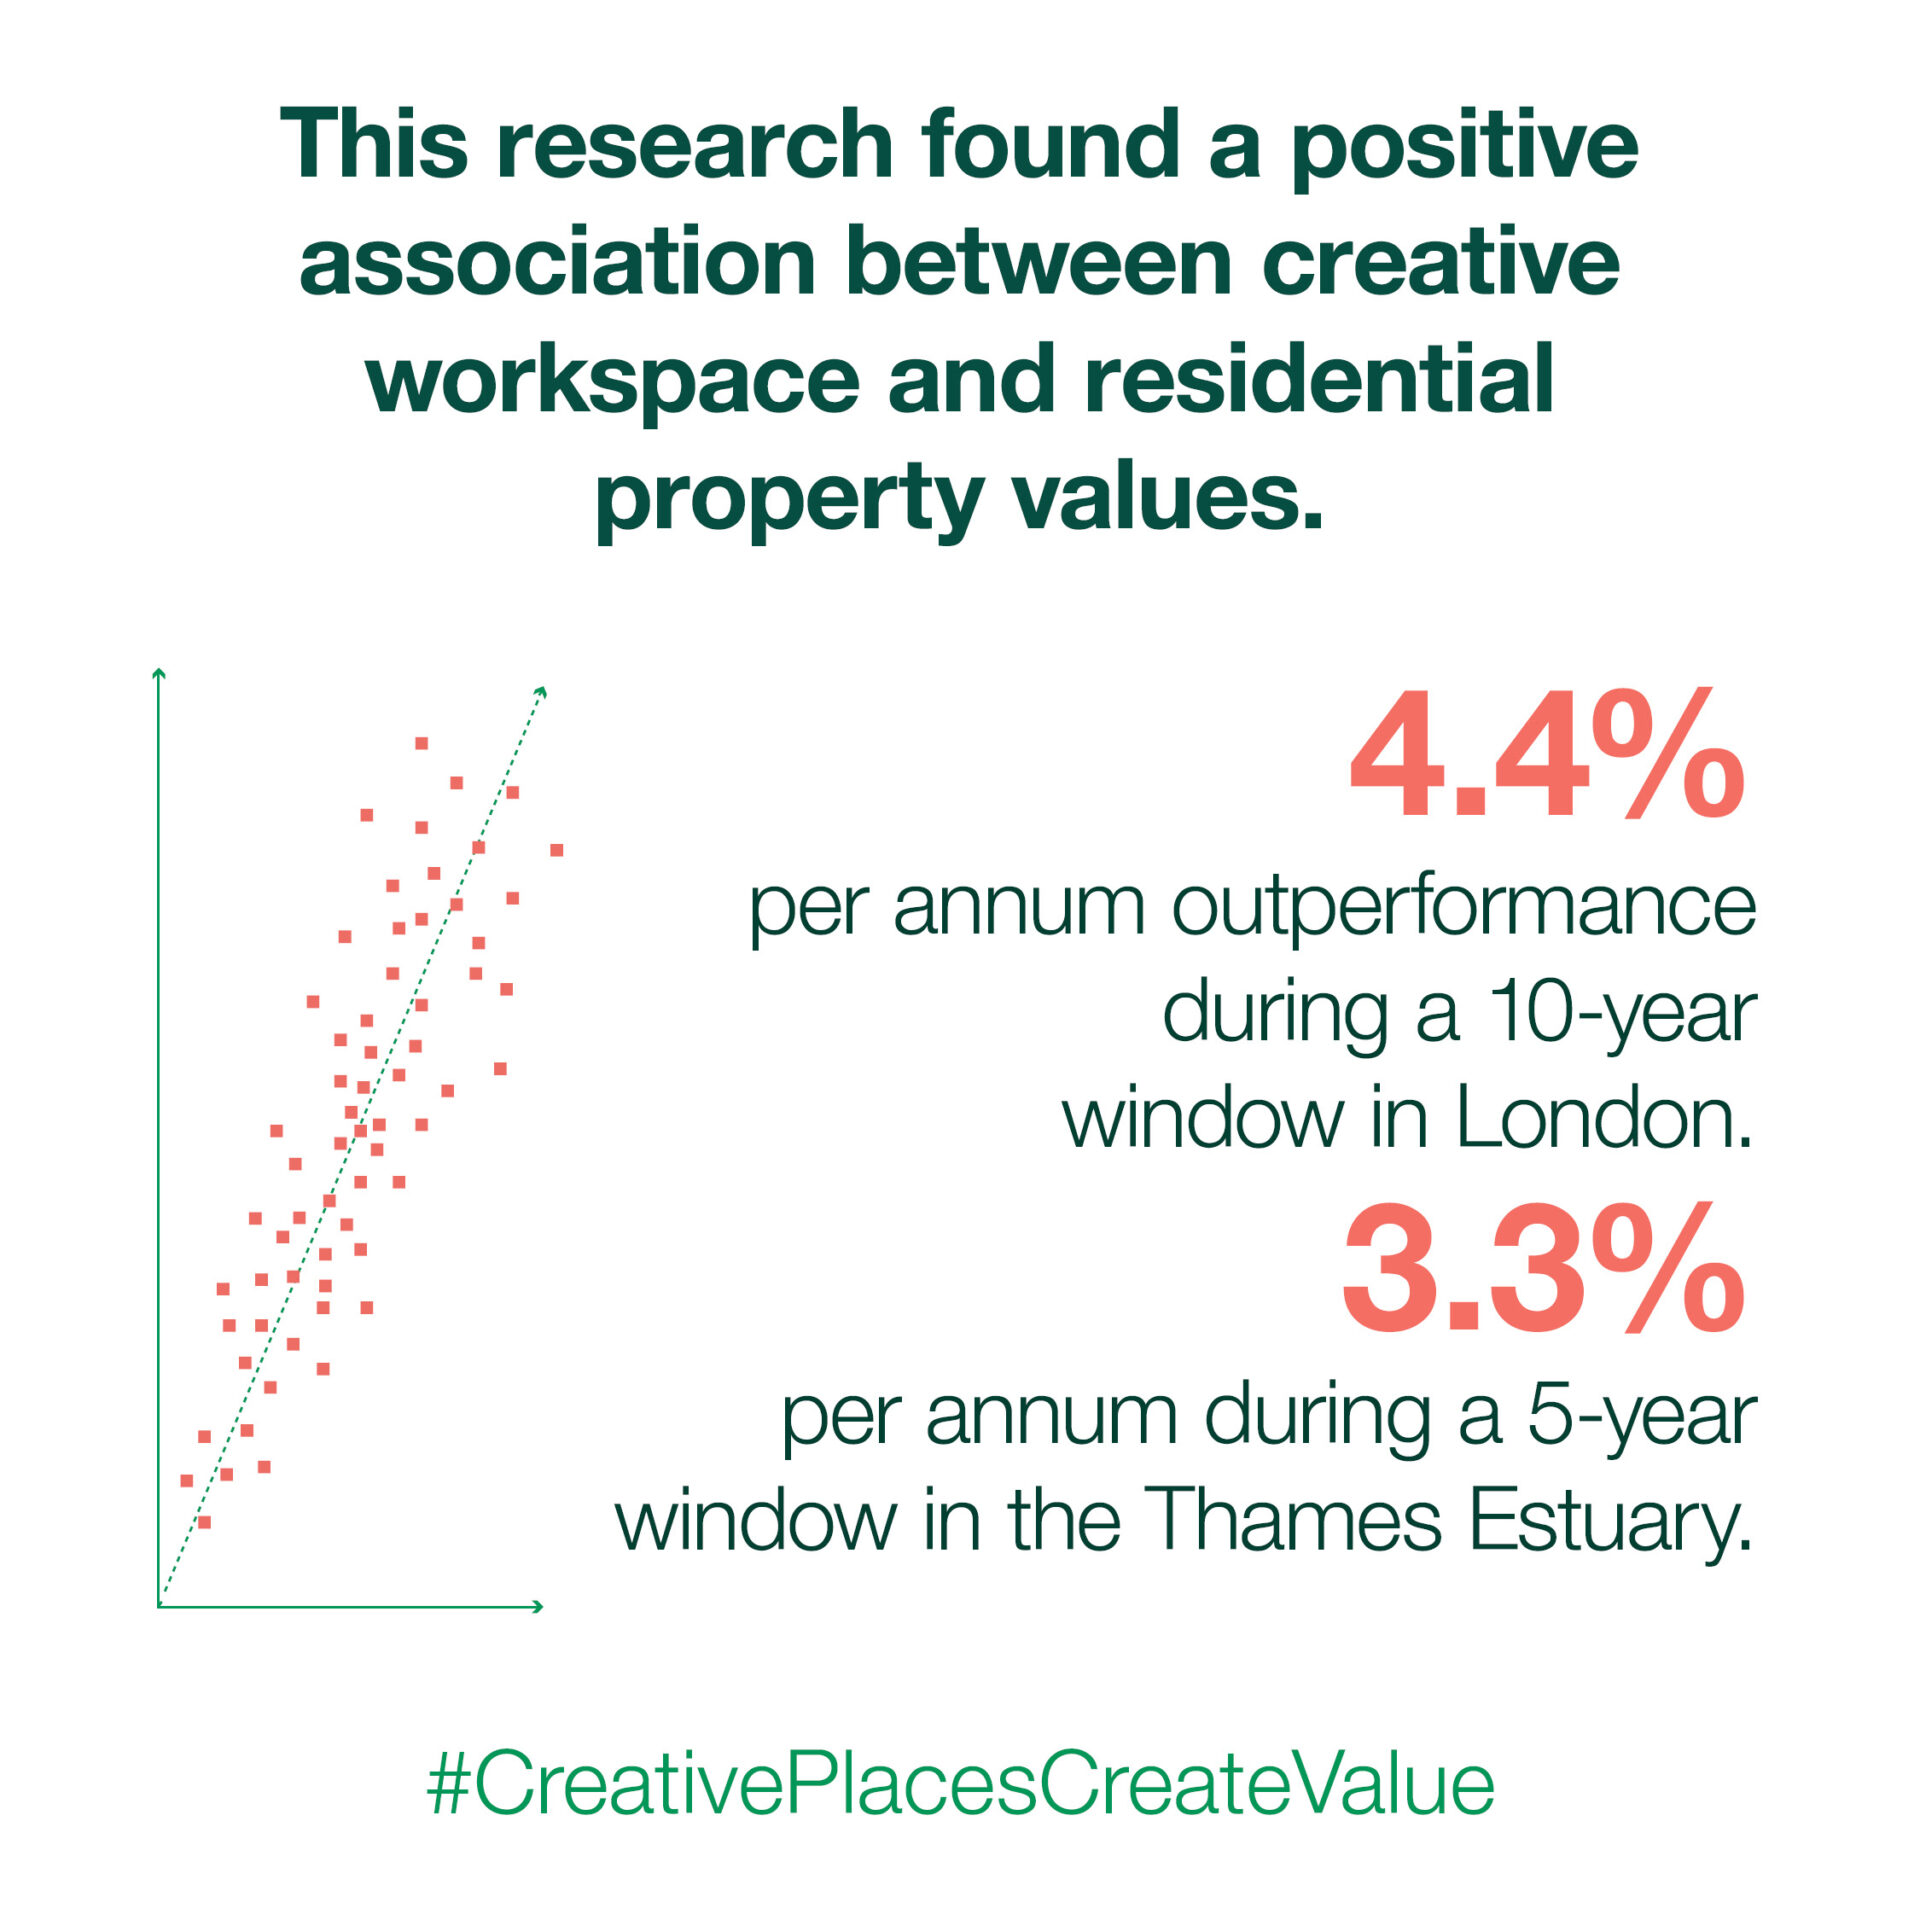 Research found a positive association between creative workspace and residential  property values. 4.4% per annum outperformances during a 10-year period in London and 3.3% per annum during a 5-year period in the Thames Estuary #CreativePlaceCreateValue